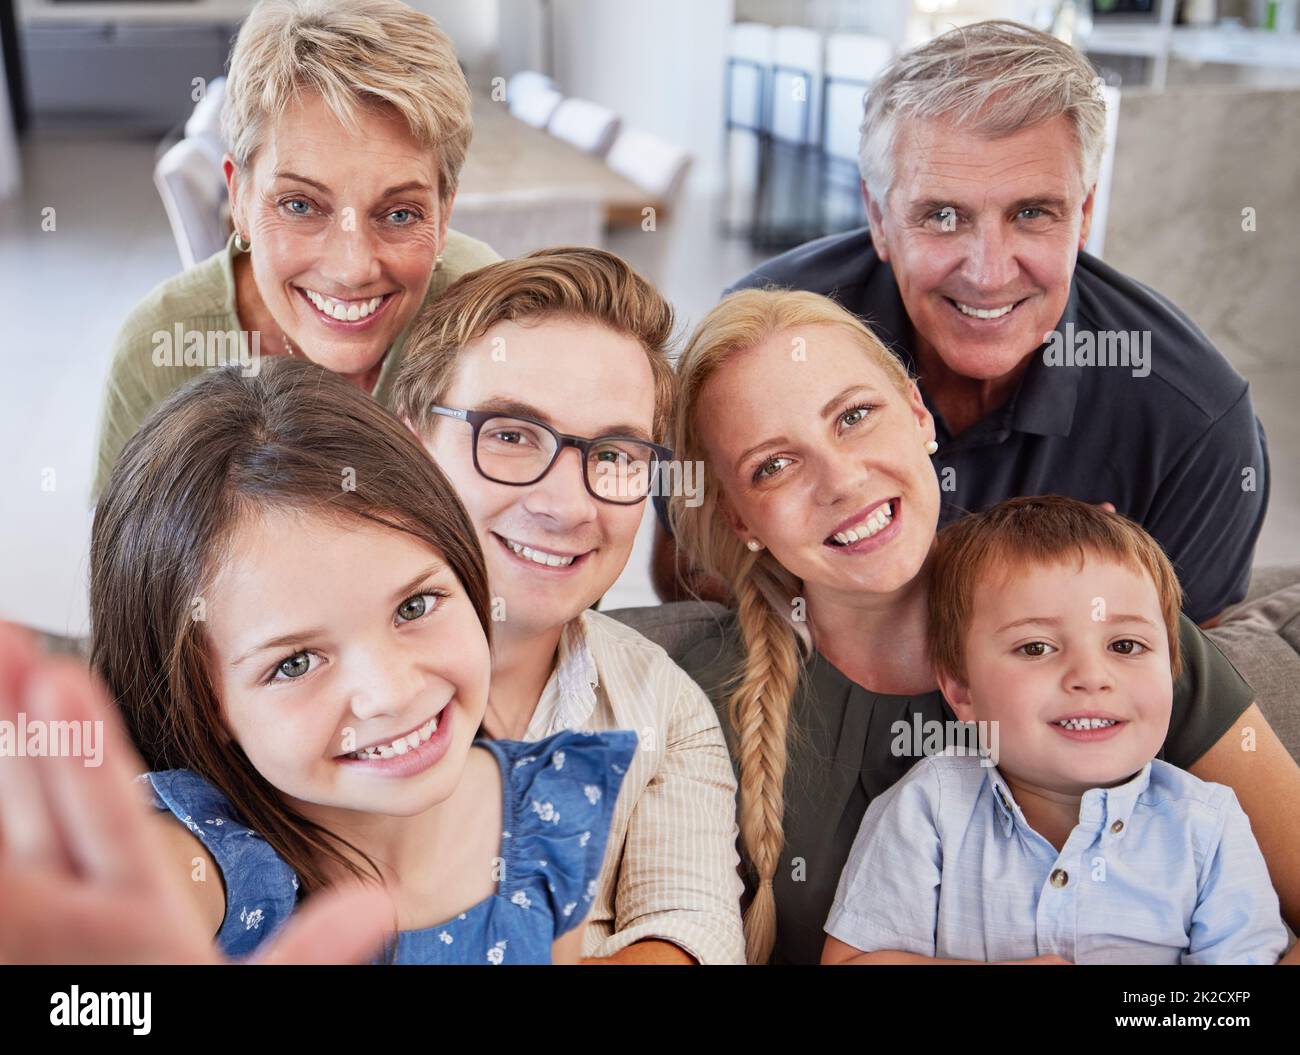 Family, children and selfie in bond with men, women and kids in house living room or home interior. Portrait, smile and happy mother, father and Stock Photo